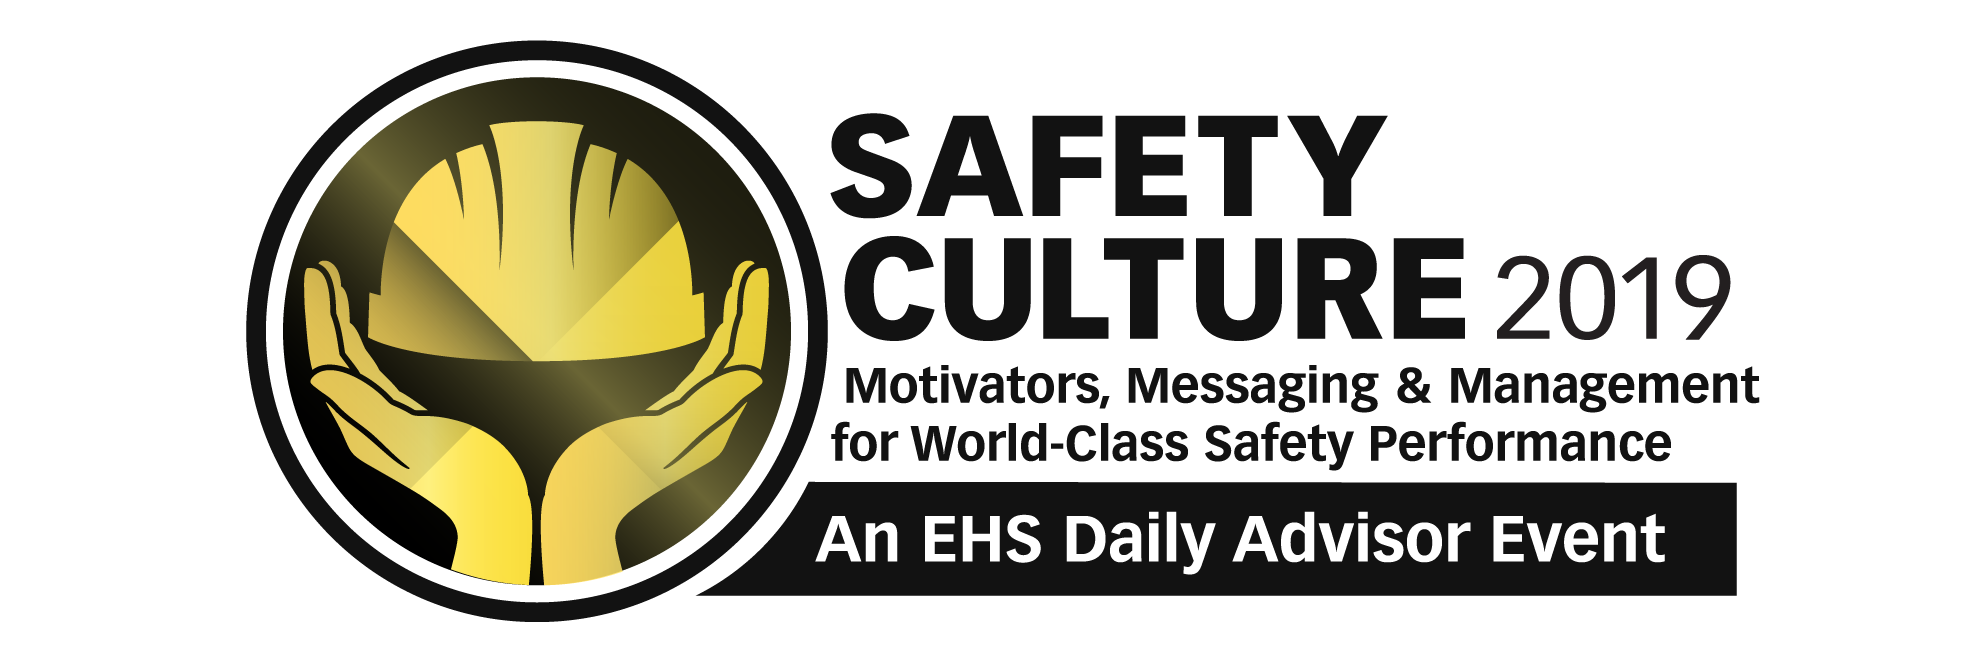 Safety Culture 2019